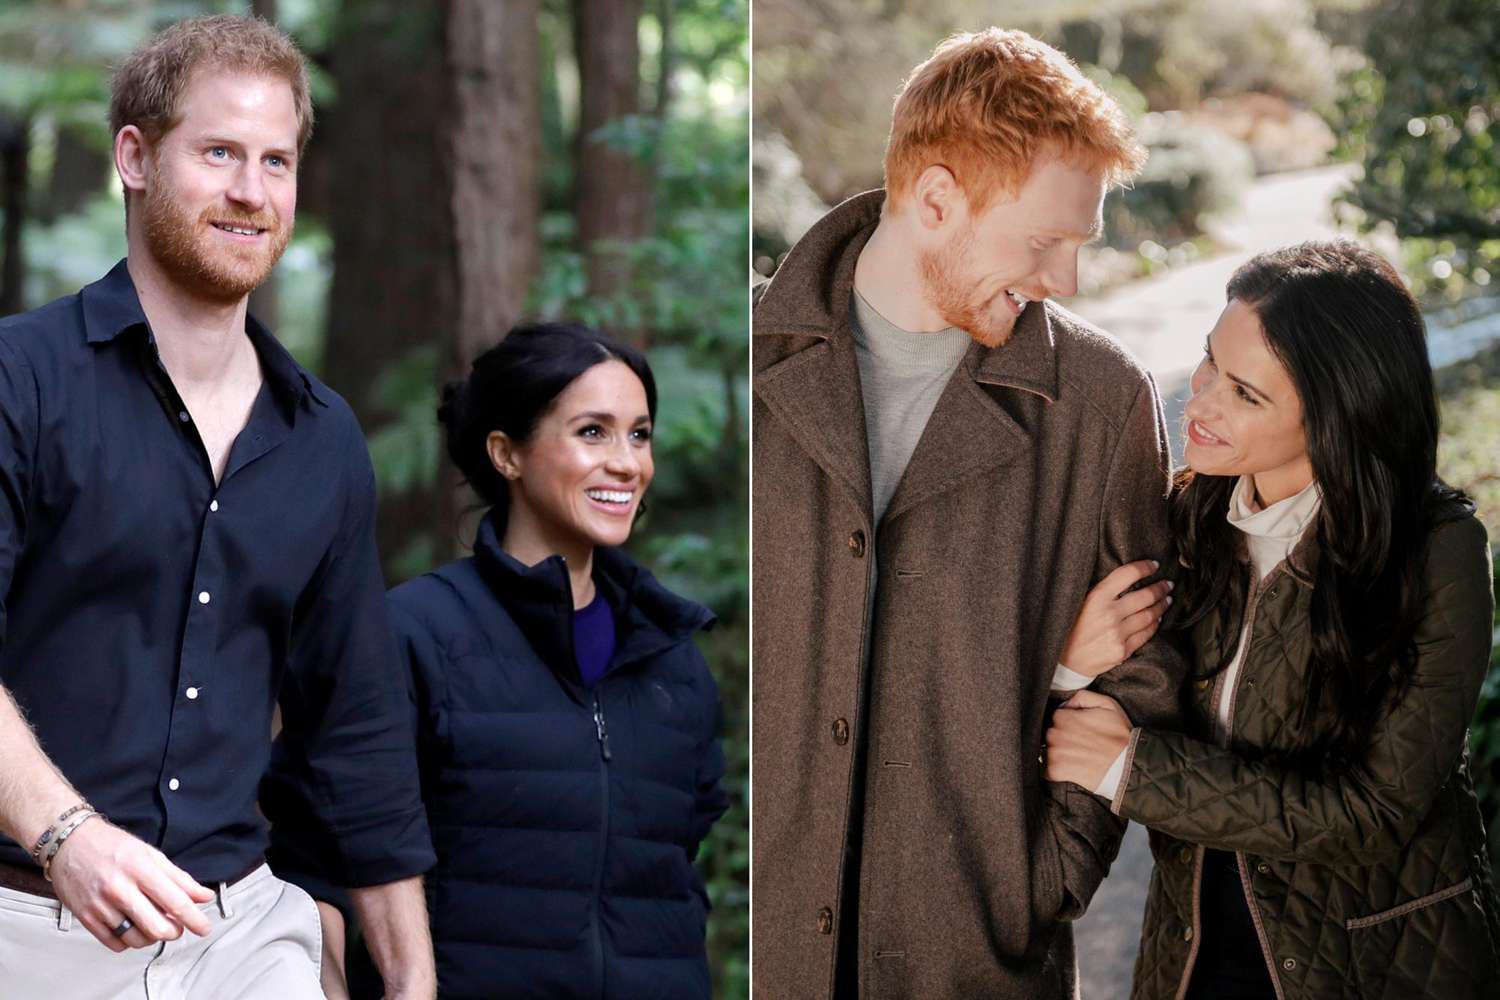 ROTORUA, NEW ZEALAND - OCTOBER 31: Prince Harry, Duke of Sussex and Meghan, Duchess of Sussex visit Redwoods Tree Walk on October 31, 2018 in Rotorua, New Zealand. The Duke and Duchess of Sussex are on the final day of their official 16-day Autumn tour visiting cities in Australia, Fiji, Tonga and New Zealand. (Photo by Kirsty Wigglesworth - Pool/Getty Images) Harry & Meghan: Becoming Royal (L to R) Charlie Field and Tiffany Smith star in Harry & Meghan: Becoming Royal premiering Monday, May 27th at 8pm ET/PT on Lifetime. Photo by Courtesy of Lifetime Copyright 2019